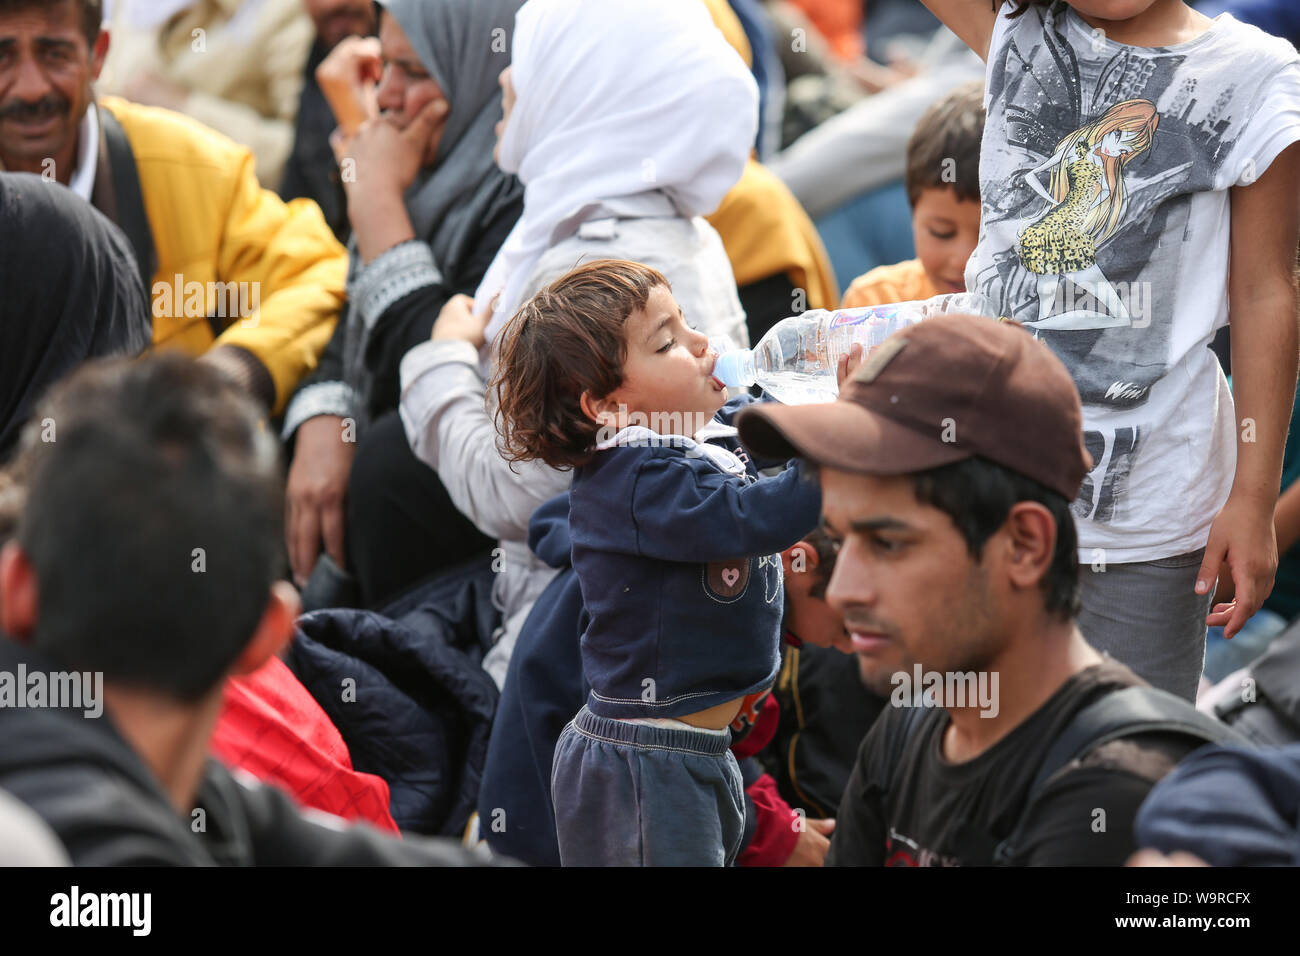 Bregana, Slovenia - September 20, 2015 : A small syrian child drinking water out of a bottle among refugees at the slovenian border with Croatia. The Stock Photo